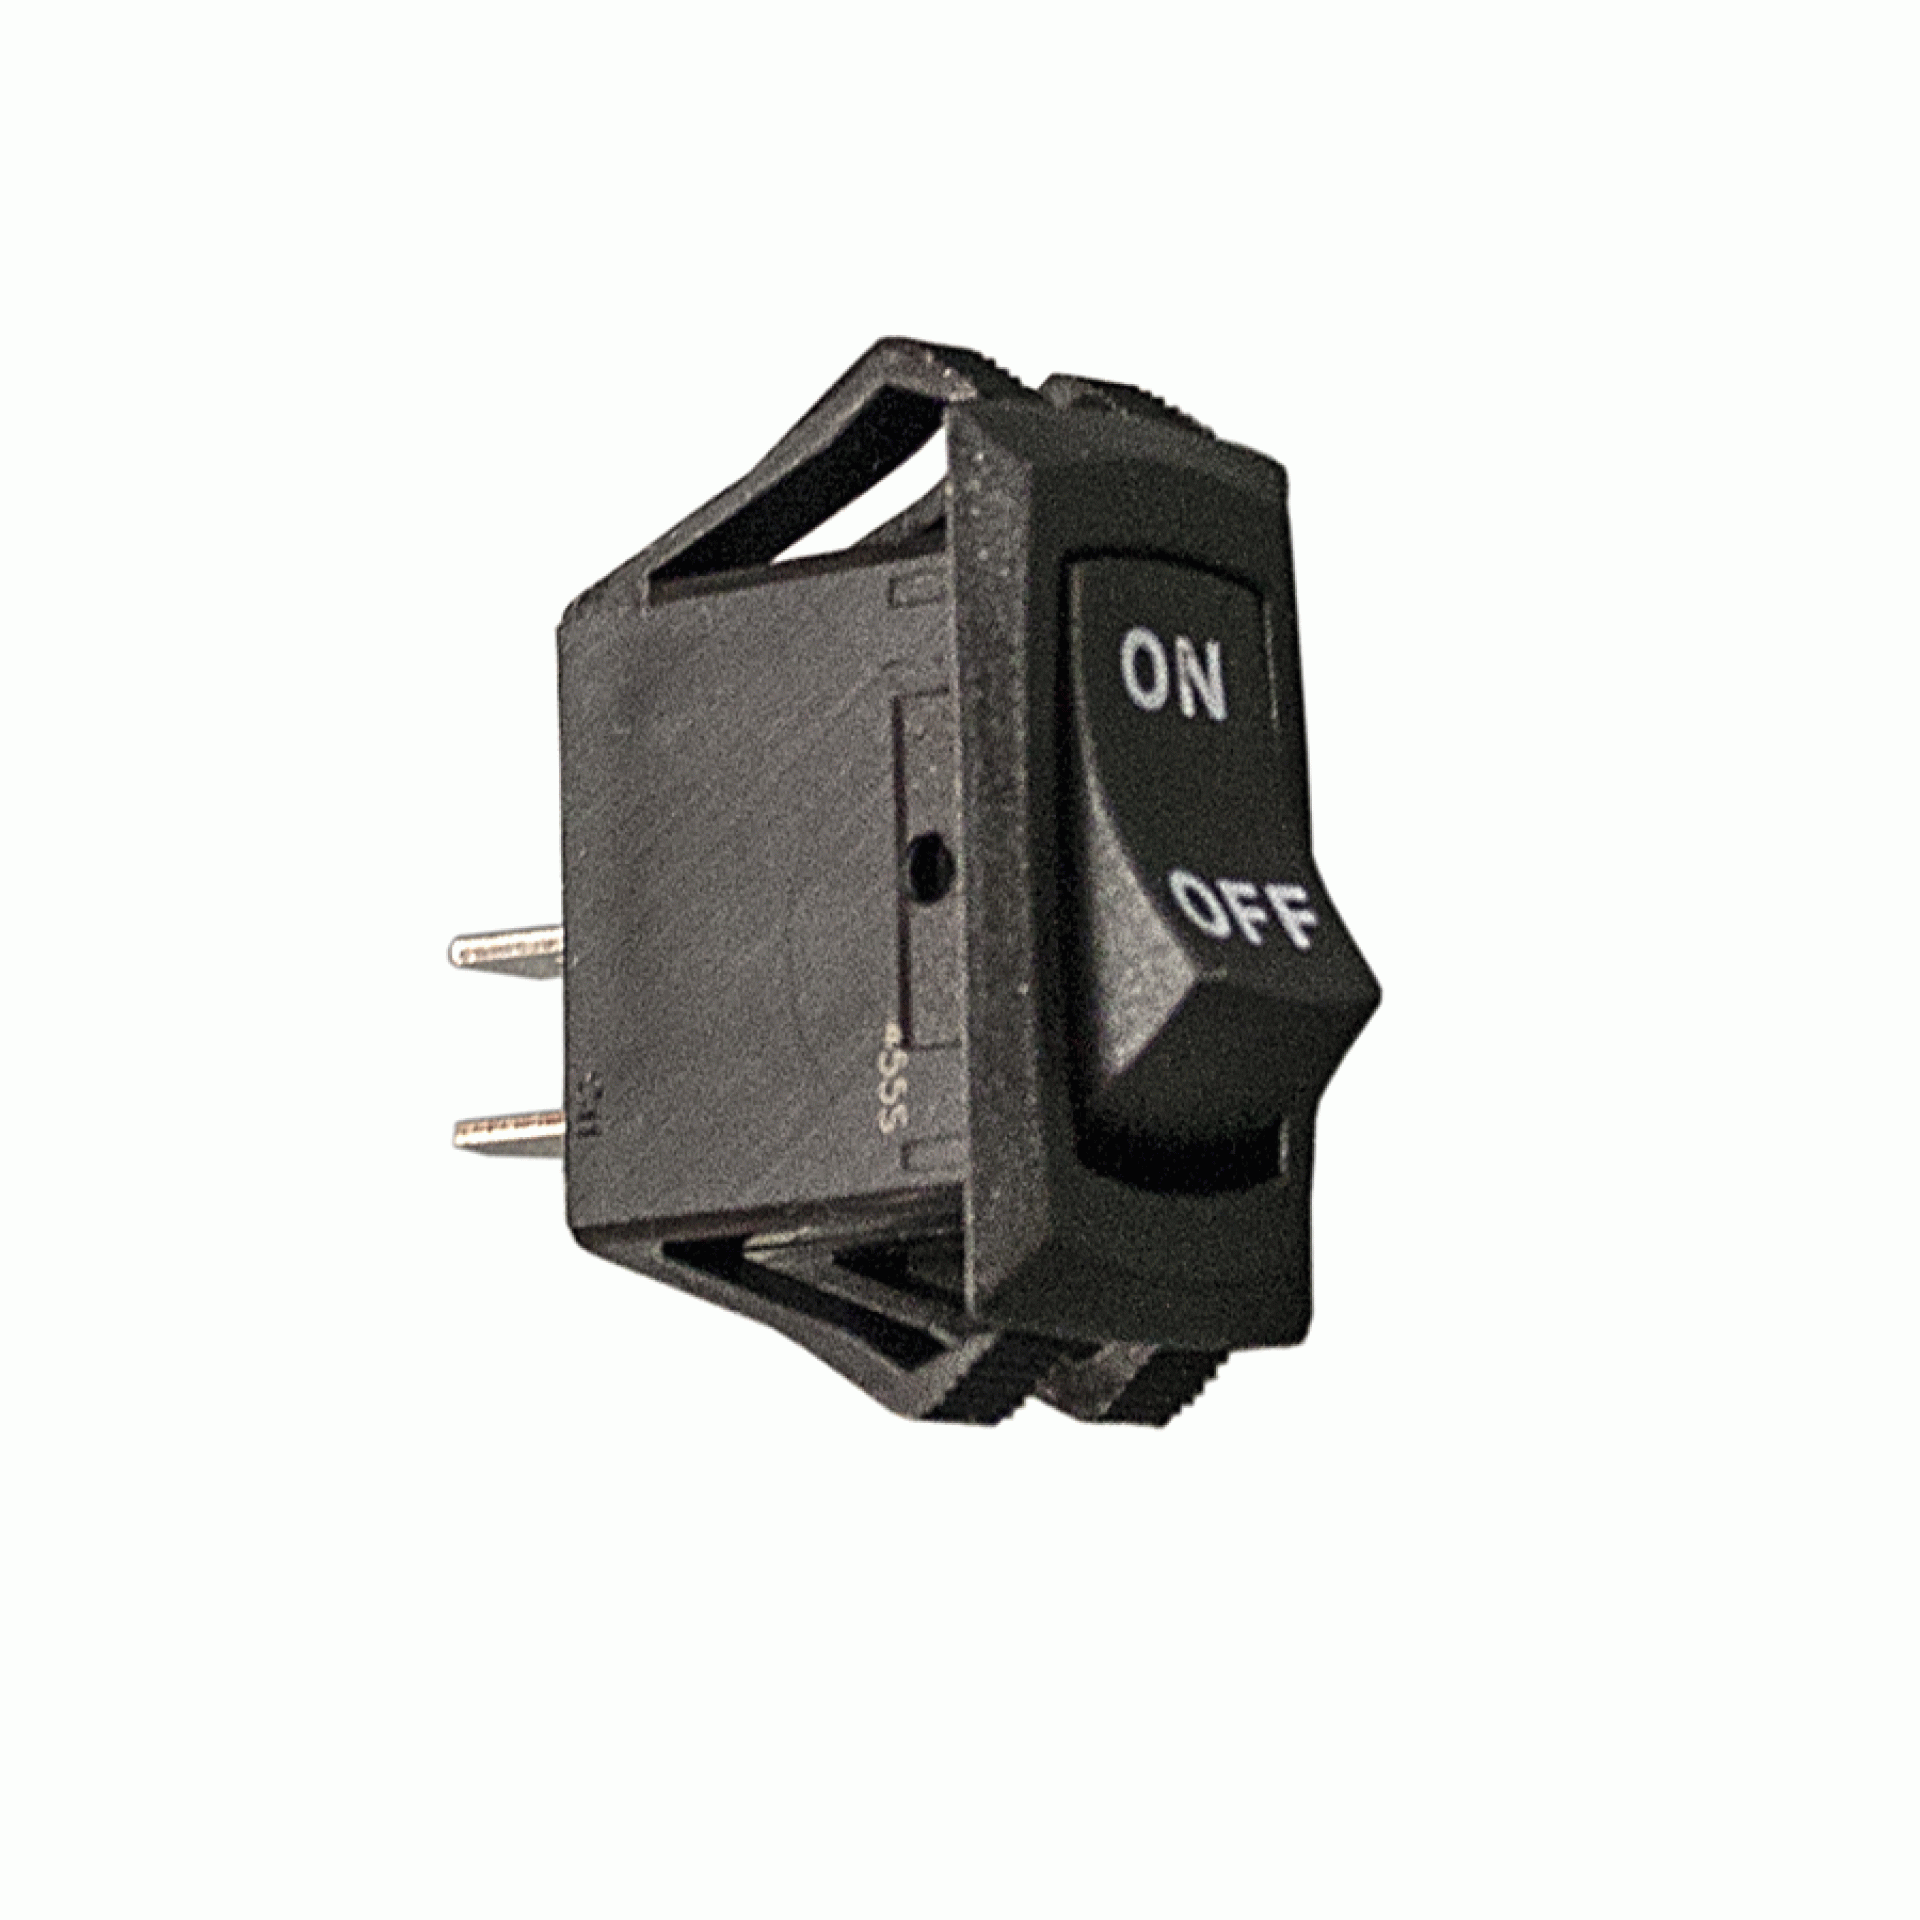 HYDRO-FLAME | 31092 | On/Off switch kit for furnaces.